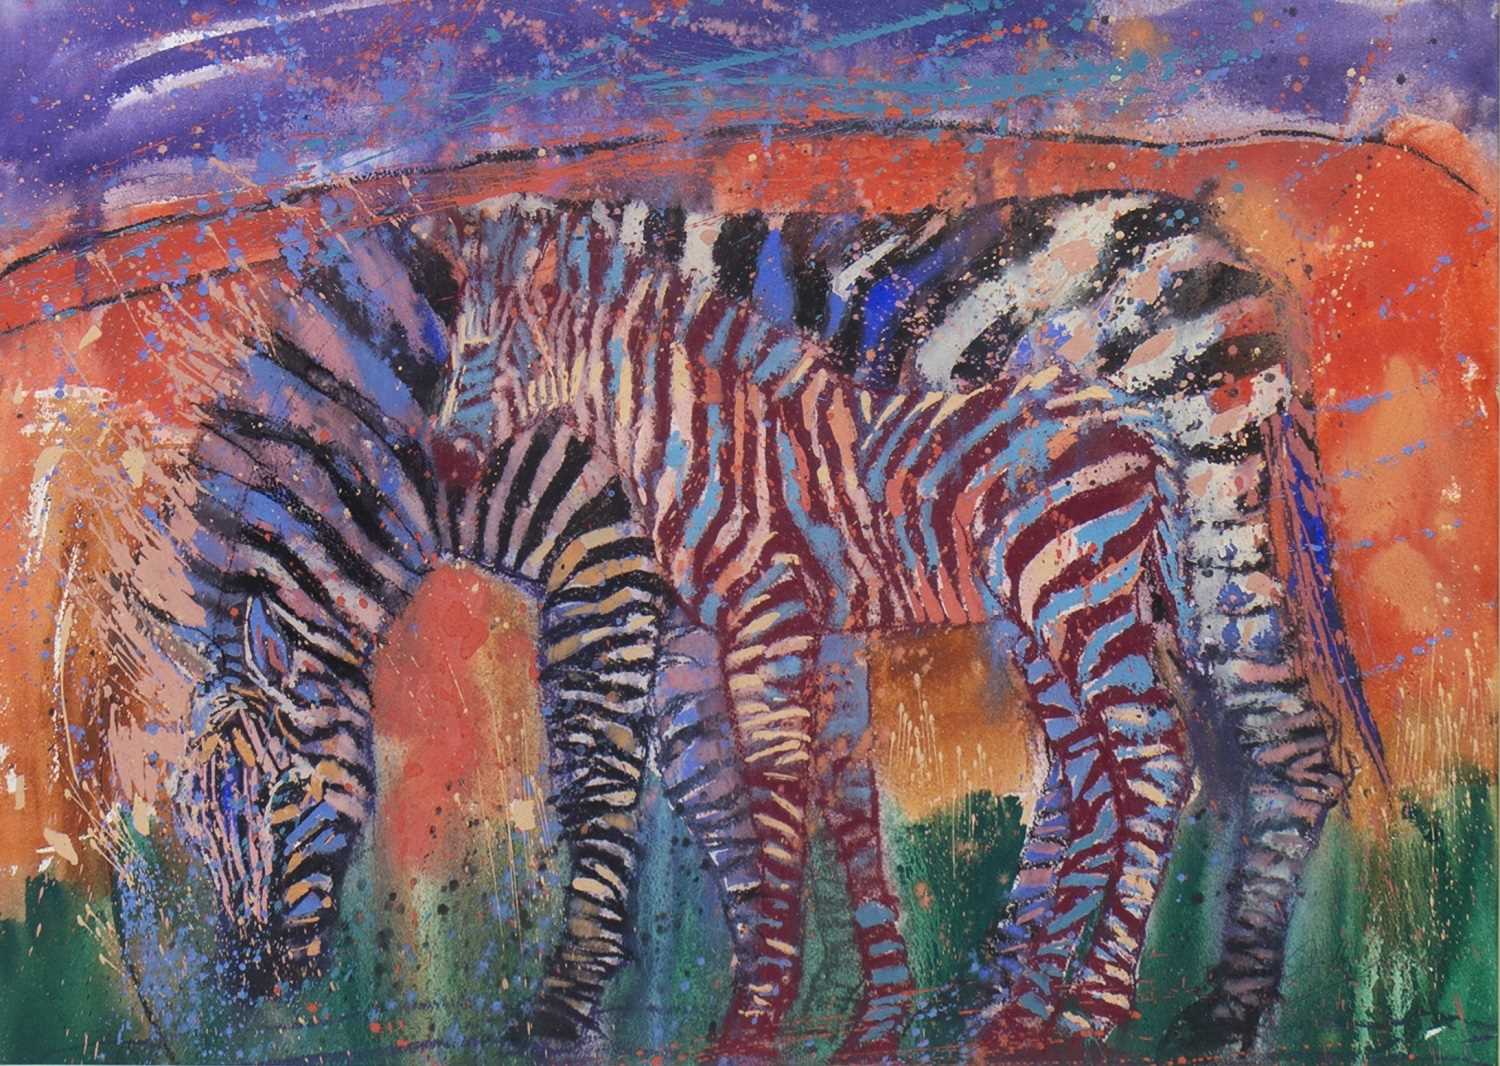 Lot 506 - ZEBRA MOTHER AND DAUGHTER, A MIXED MEDIA BY SALLY CARLAW